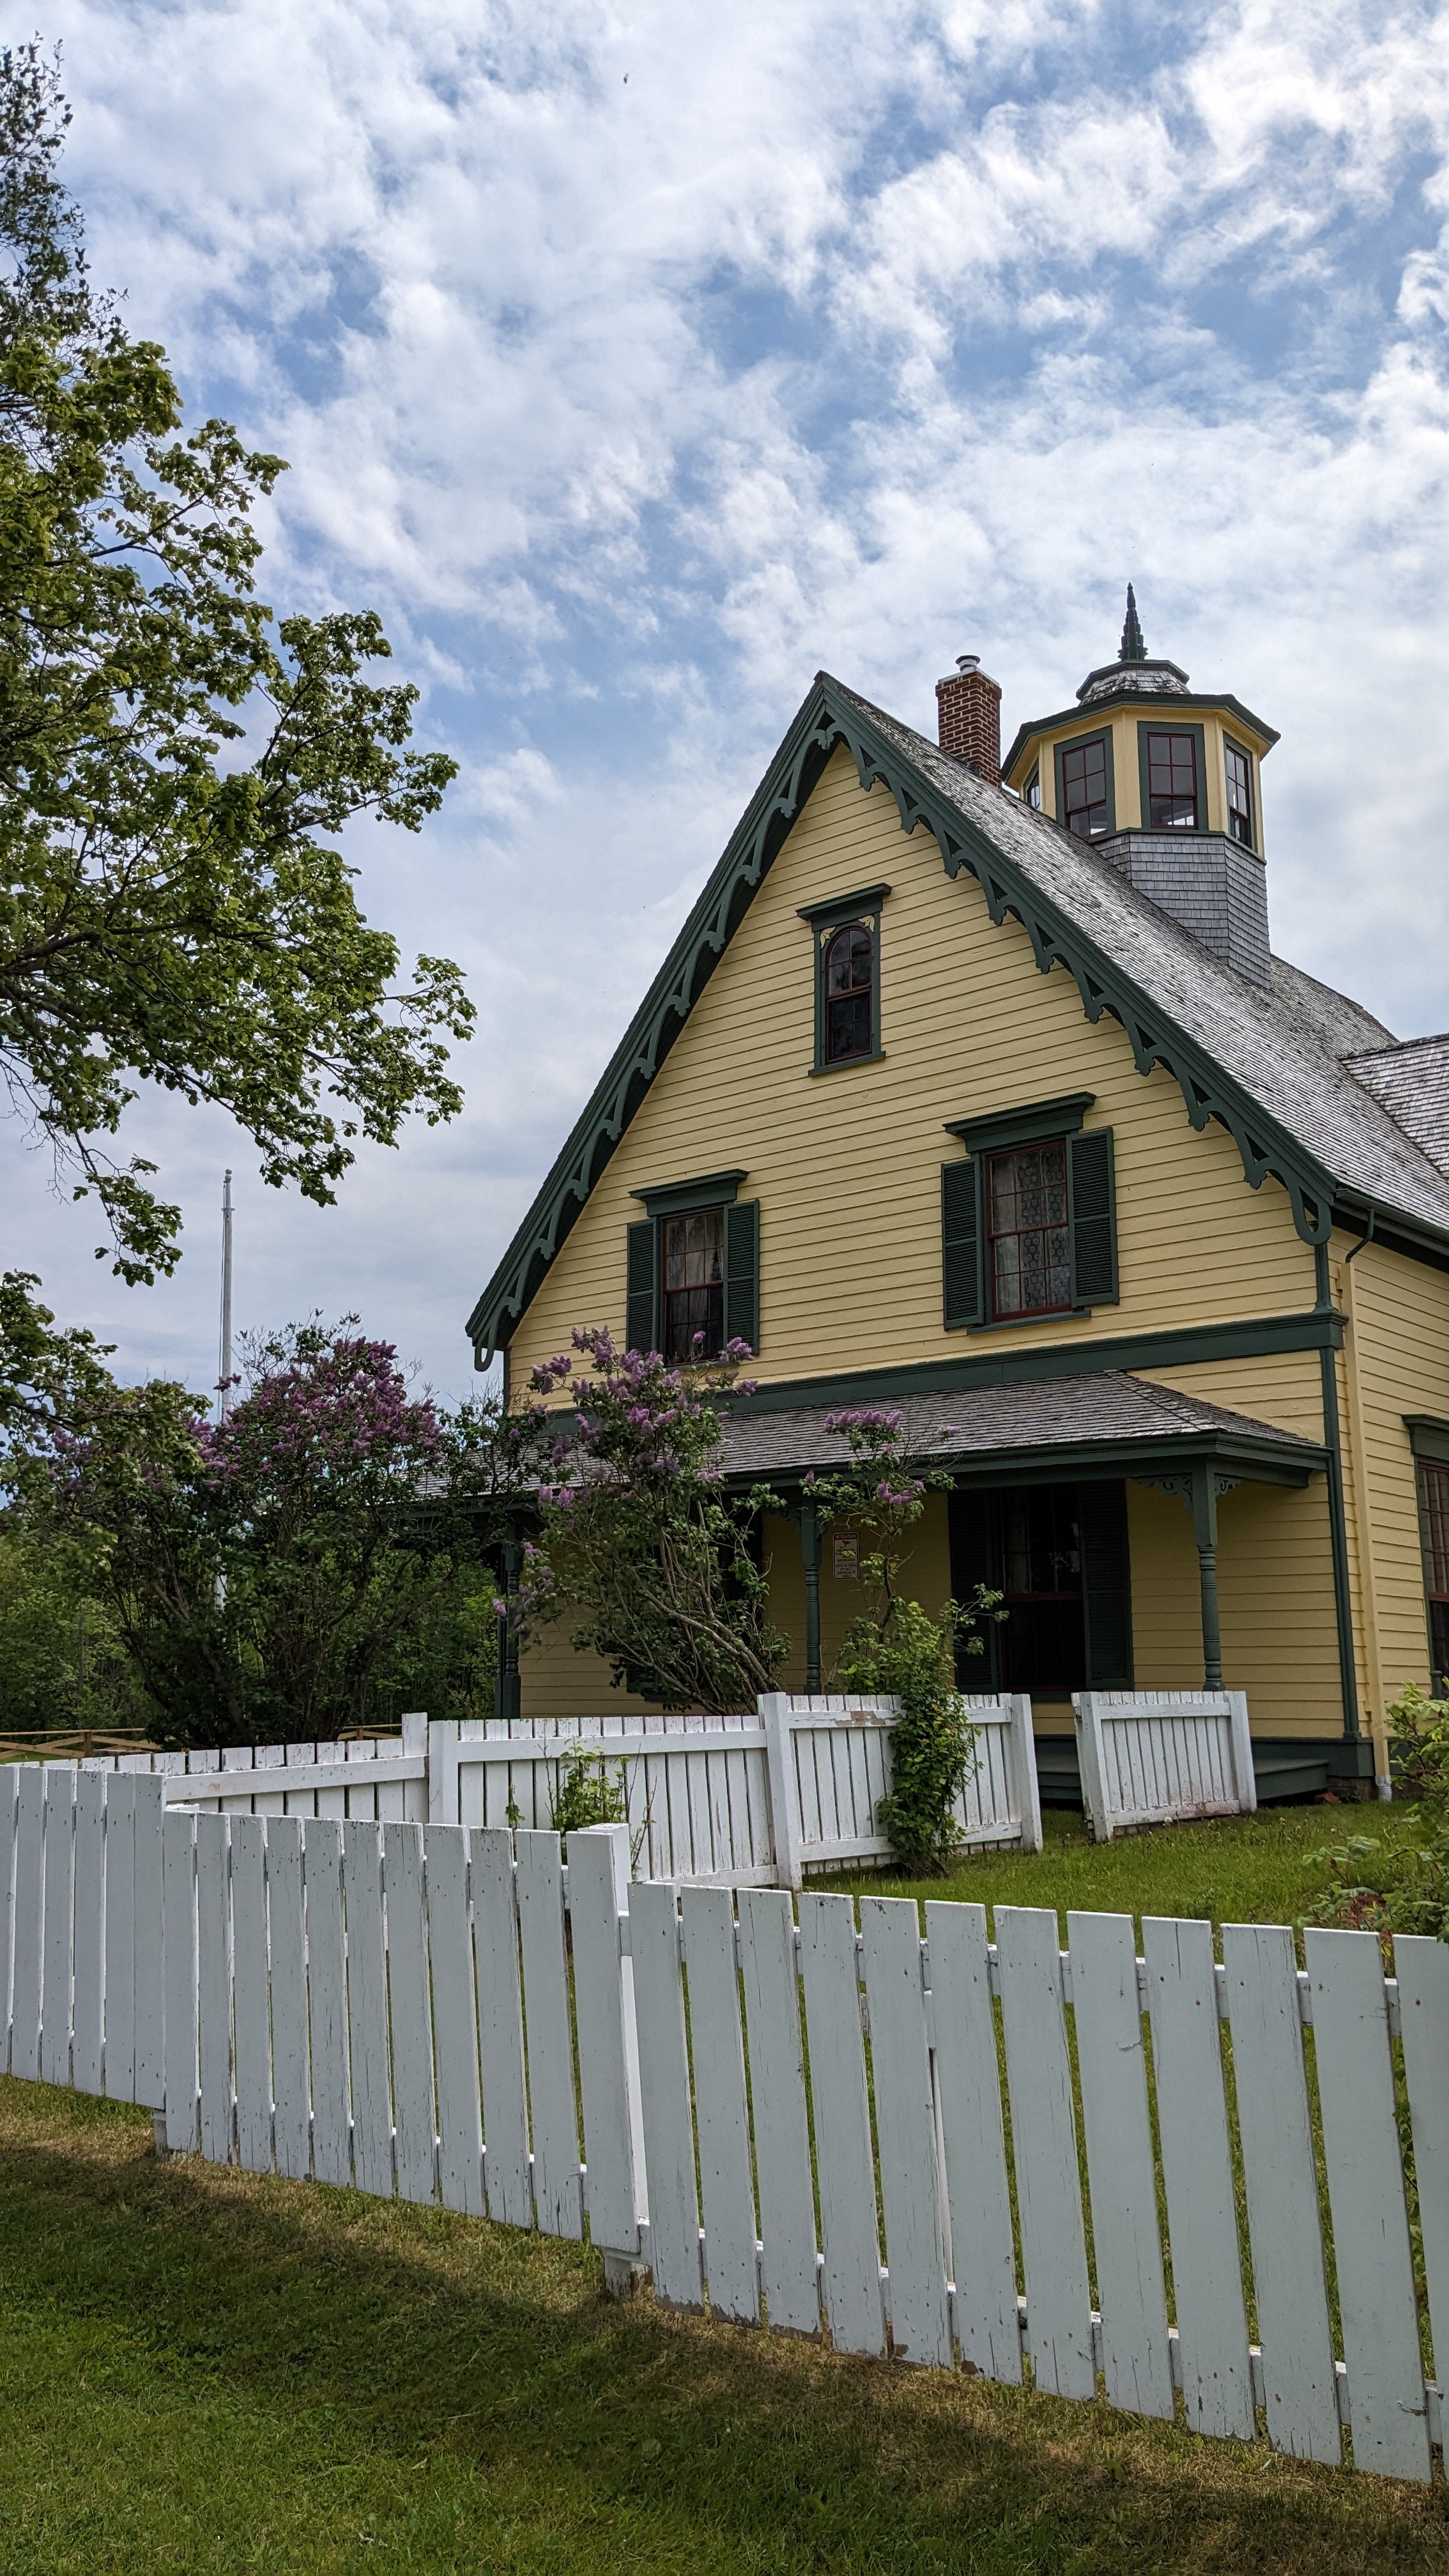 A yellow historic house with green trim. 